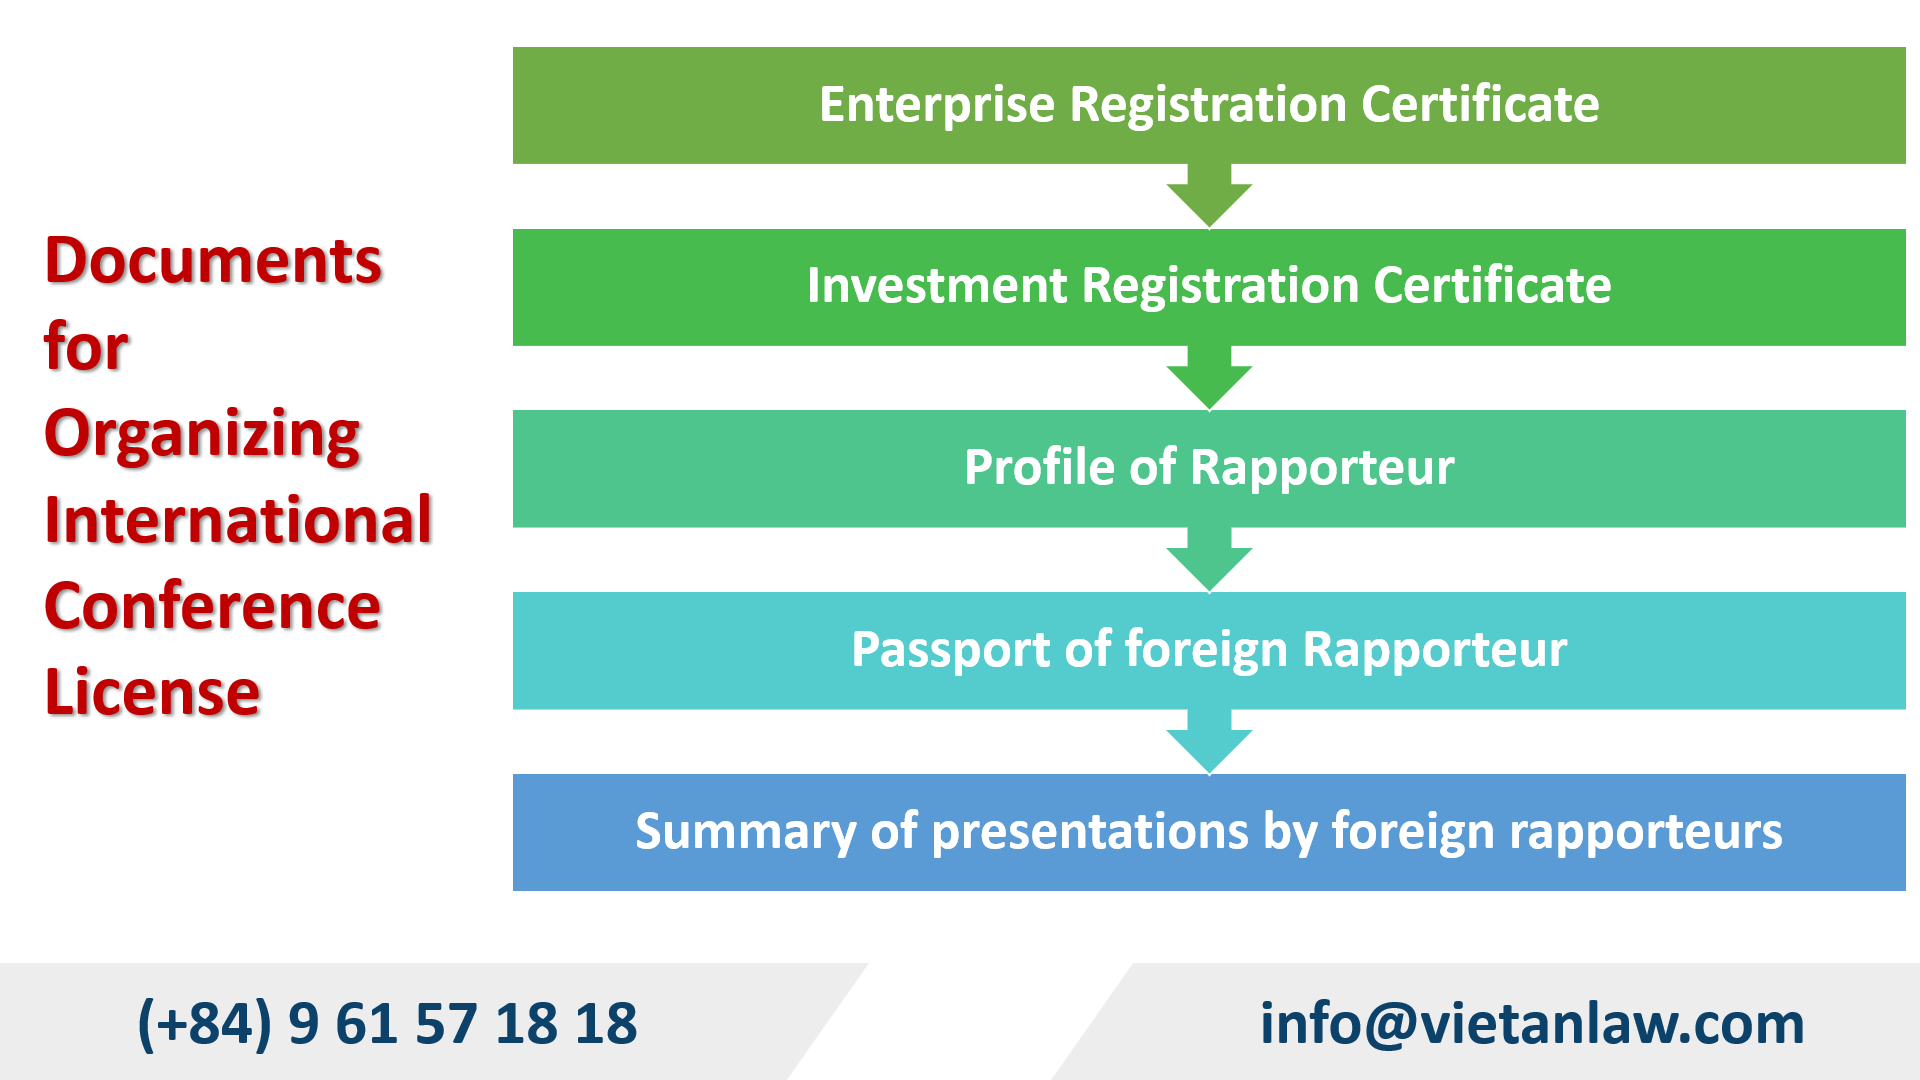 Documents for Organizing International Conference License in vietnam